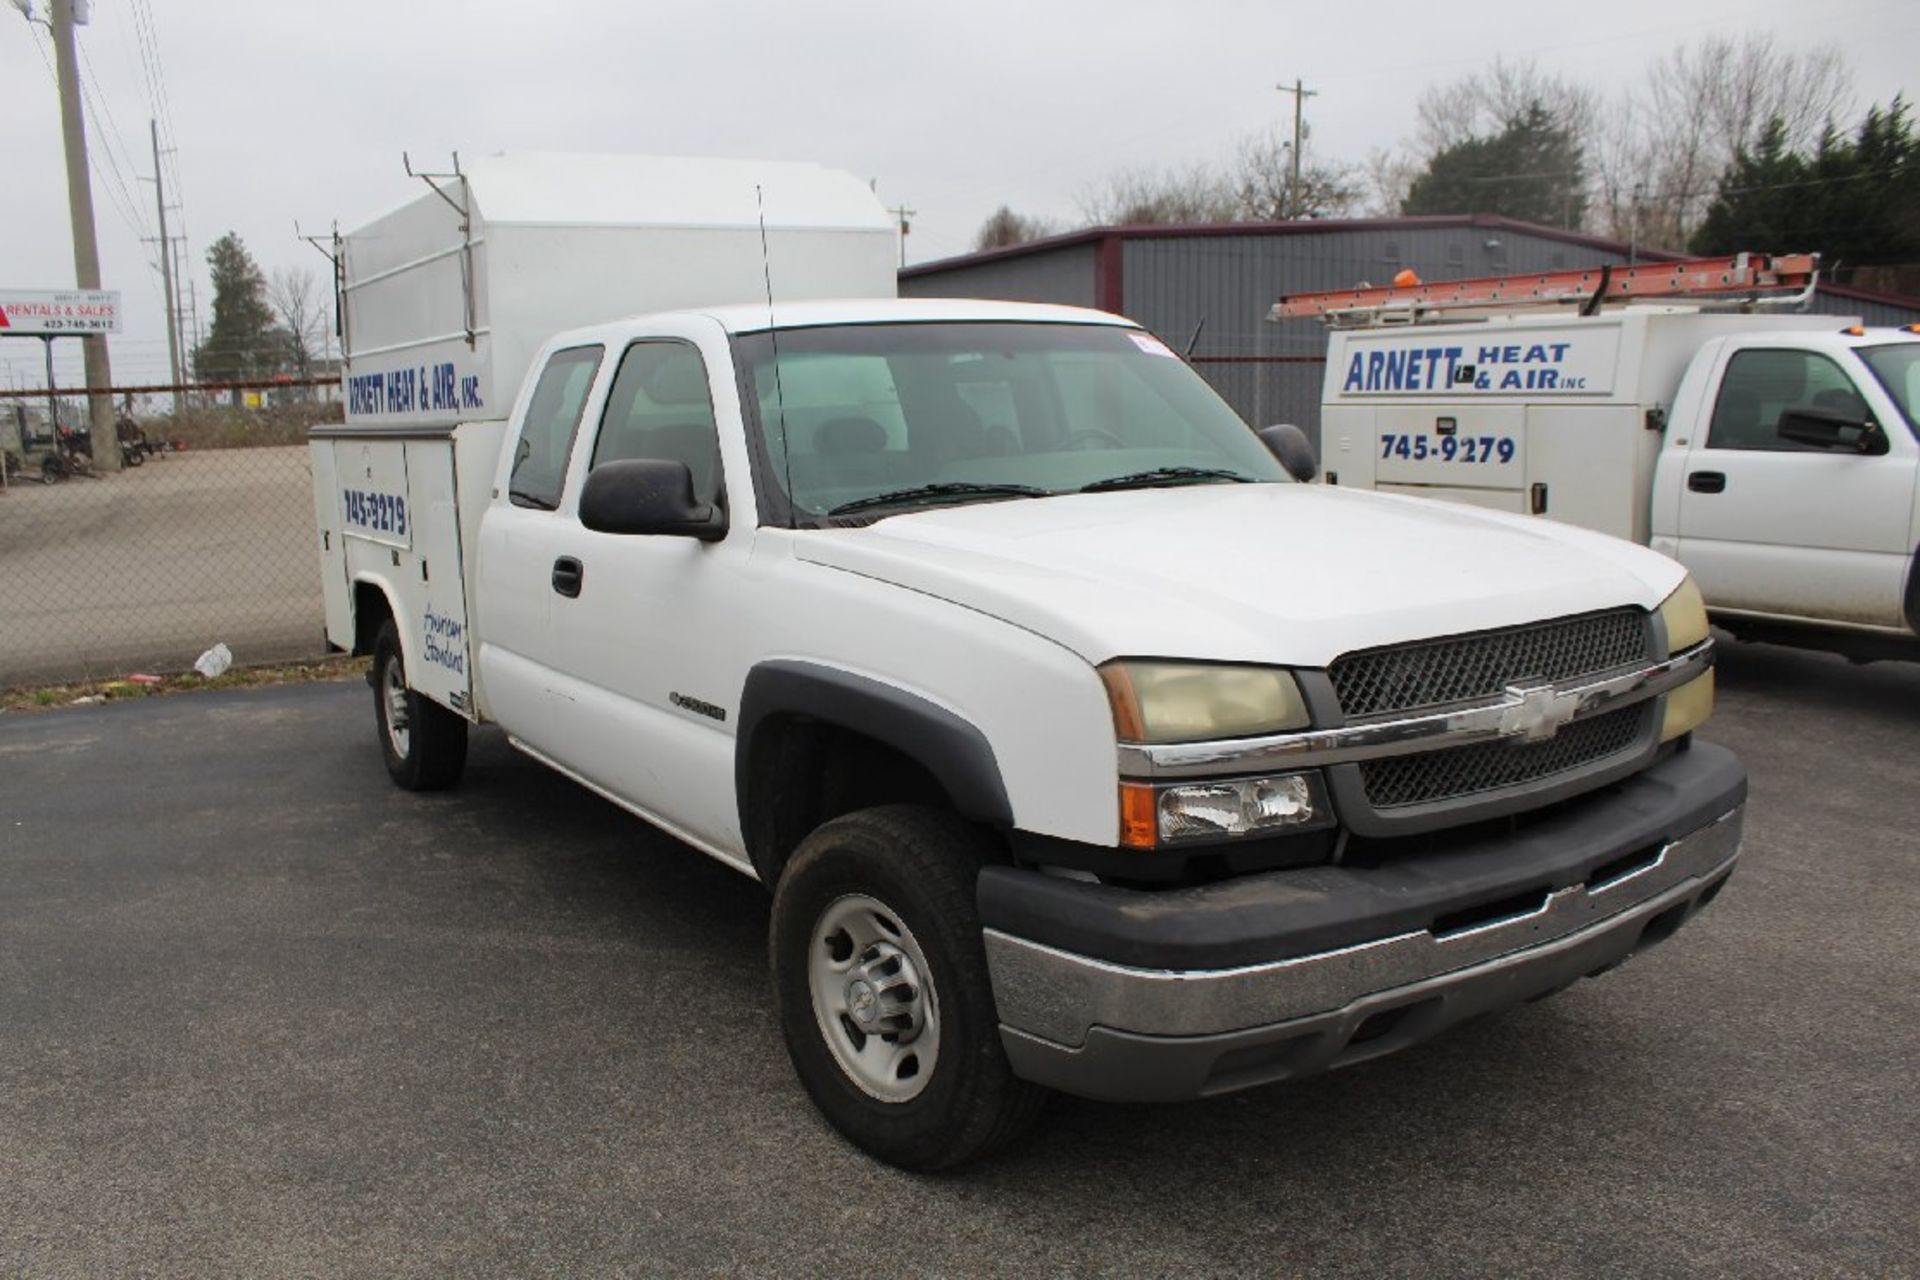 2003 Chevy Silverado 2500 Extended Cab with Utility Bed & Ladder Rack, 187,658 Miles, - Image 2 of 7